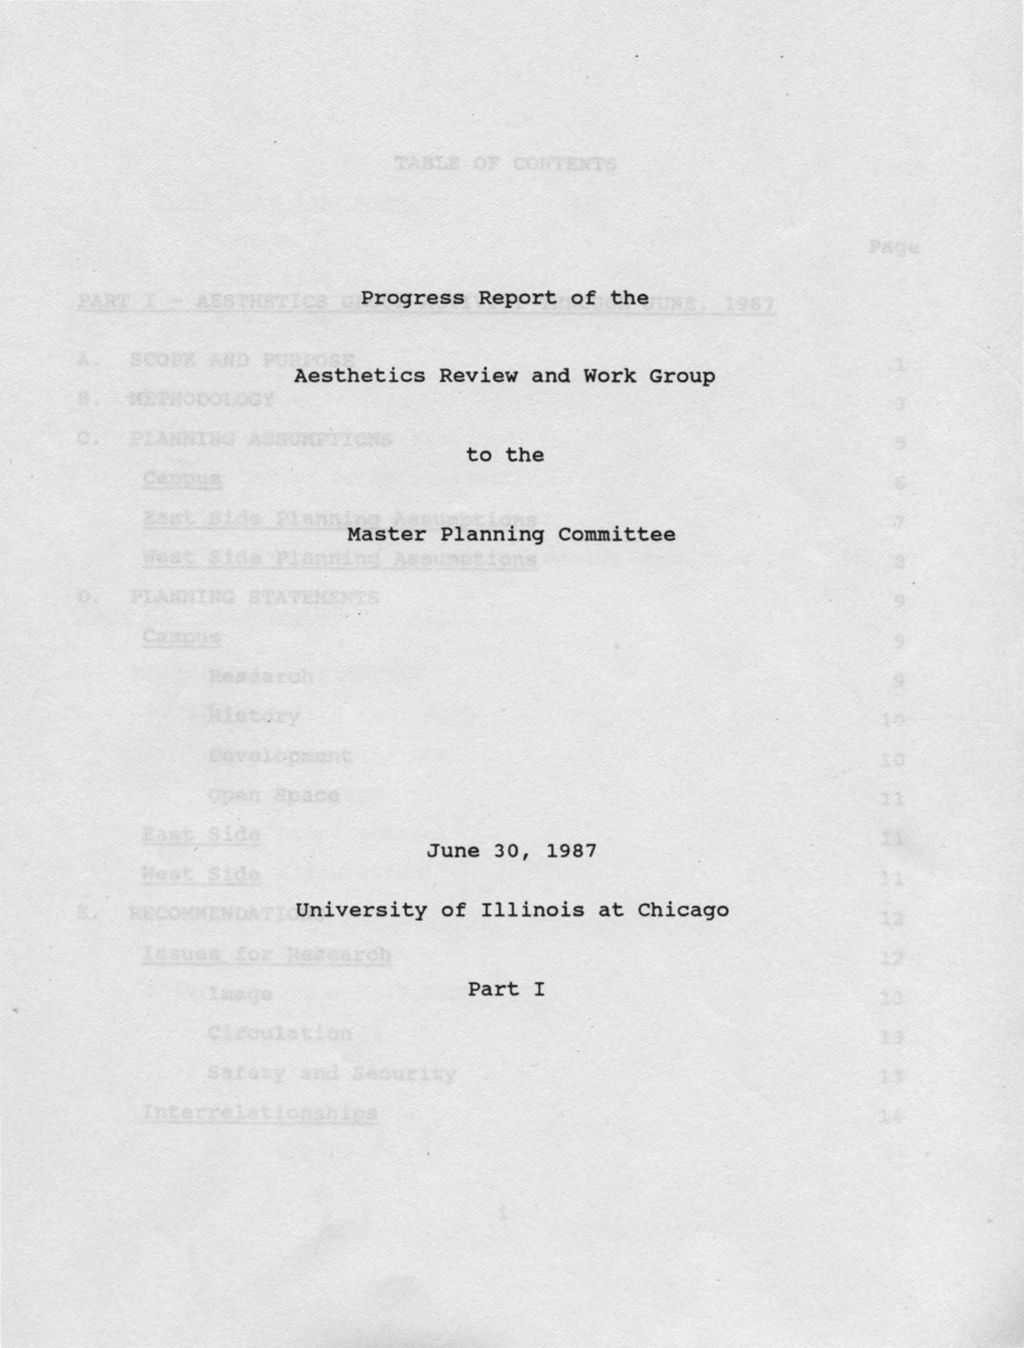 Miniature of Progress Report of the Aesthetics Review and Work Group to the Master Planning Committee, UIC. Part 1 (PDF format)